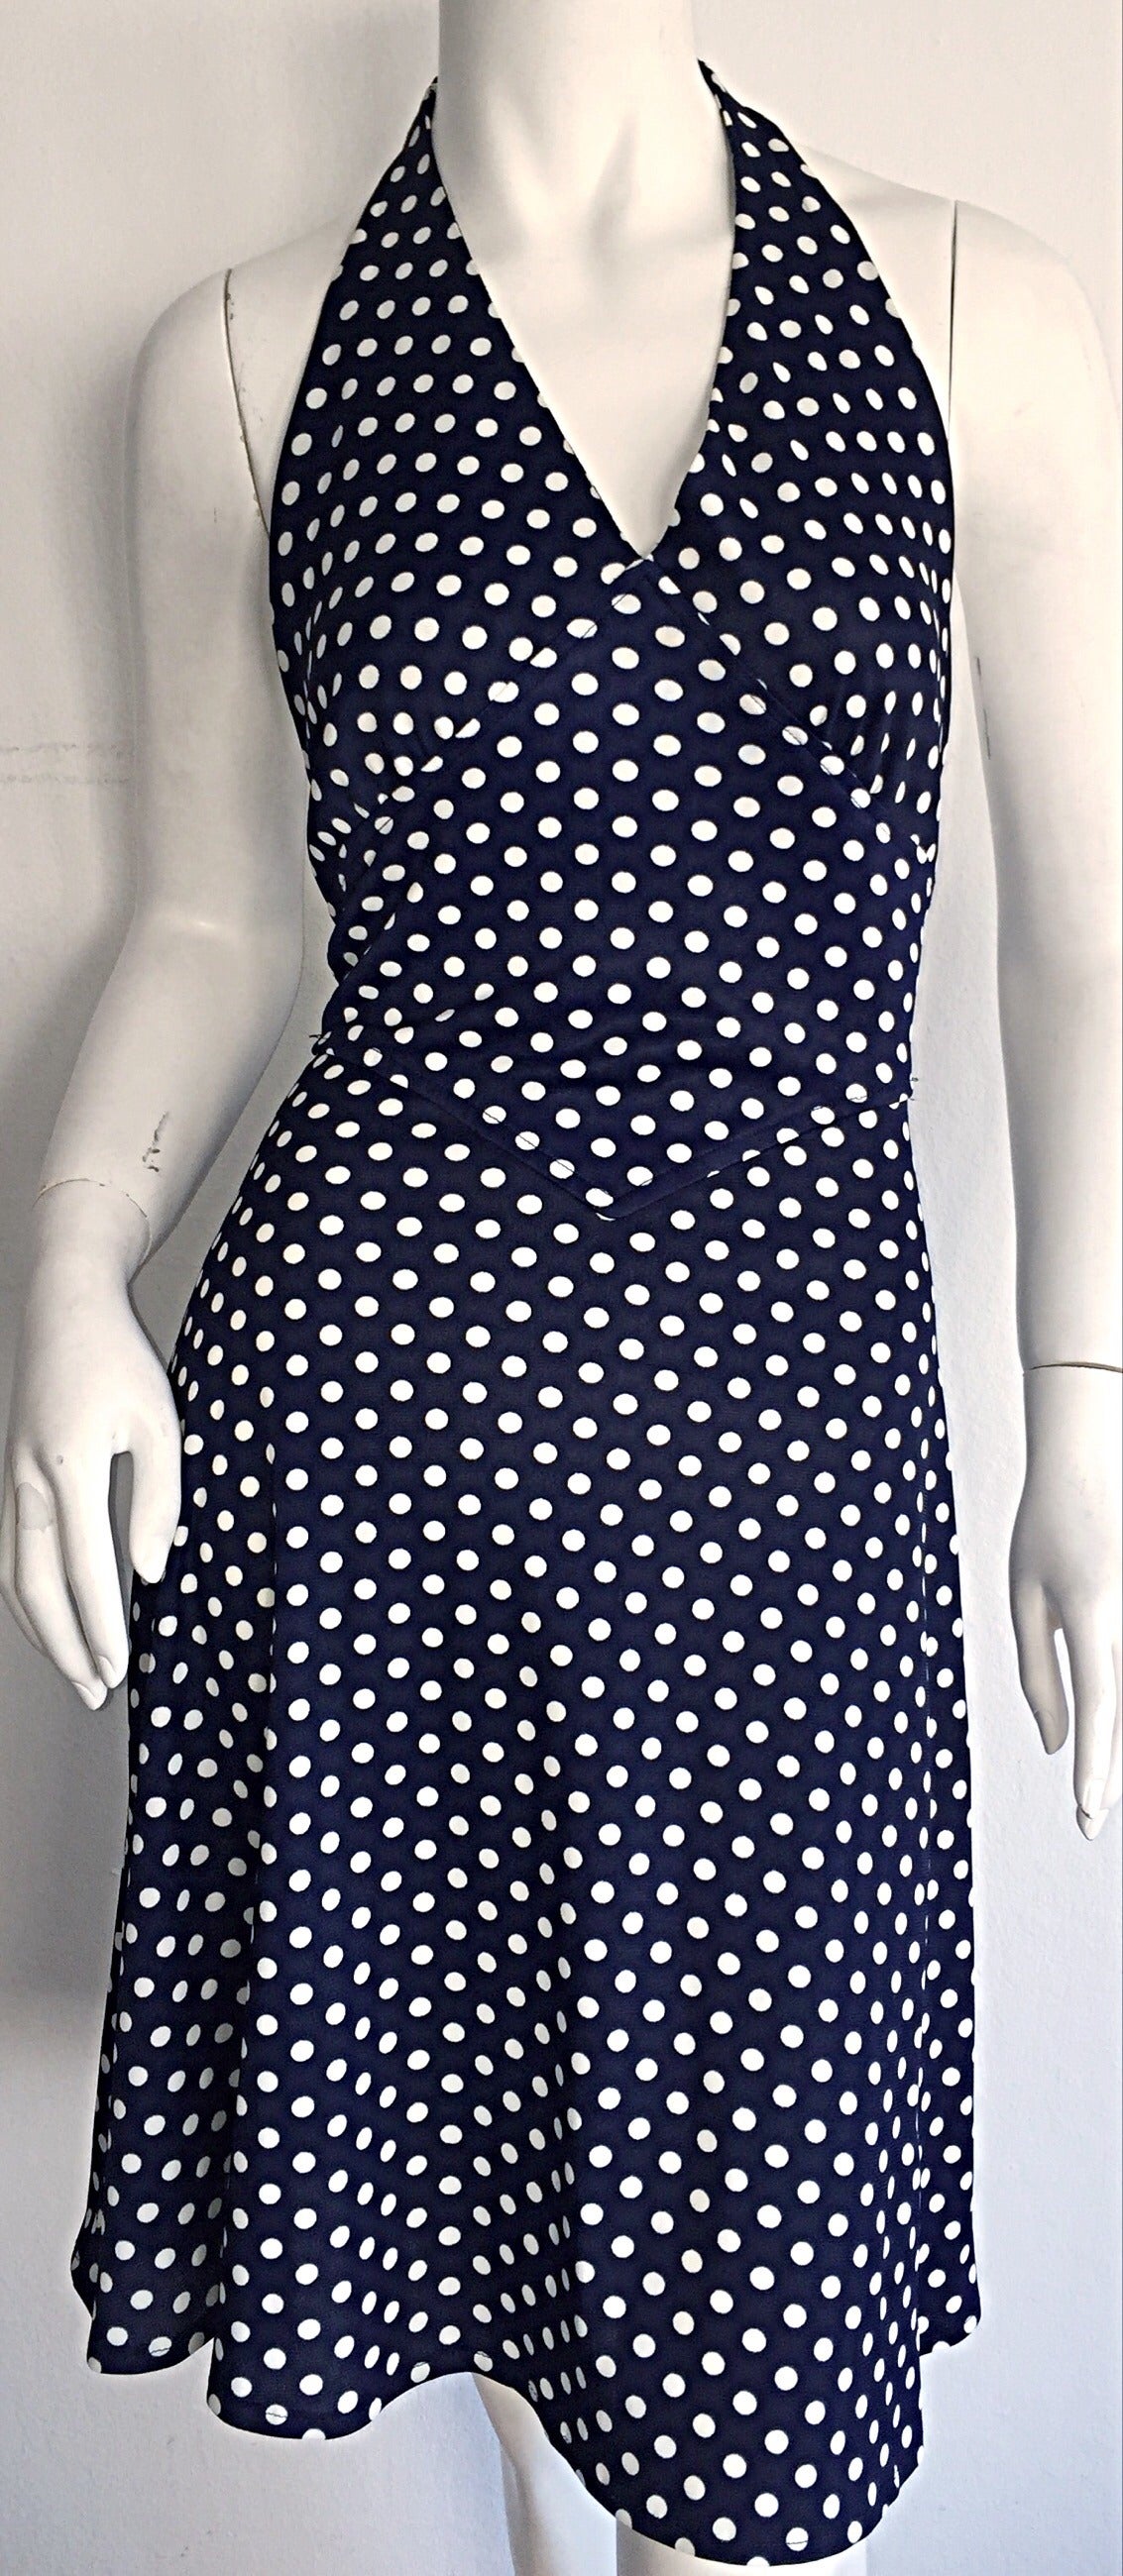 Cutest vintage Joy Stevens navy blue and white polka dot tie-back dress! Enough said to describe this beauty! Can easily transition from day to night. Looks amazing with sandals or wedges, yet, looks great with strappy heels for night. The perfect